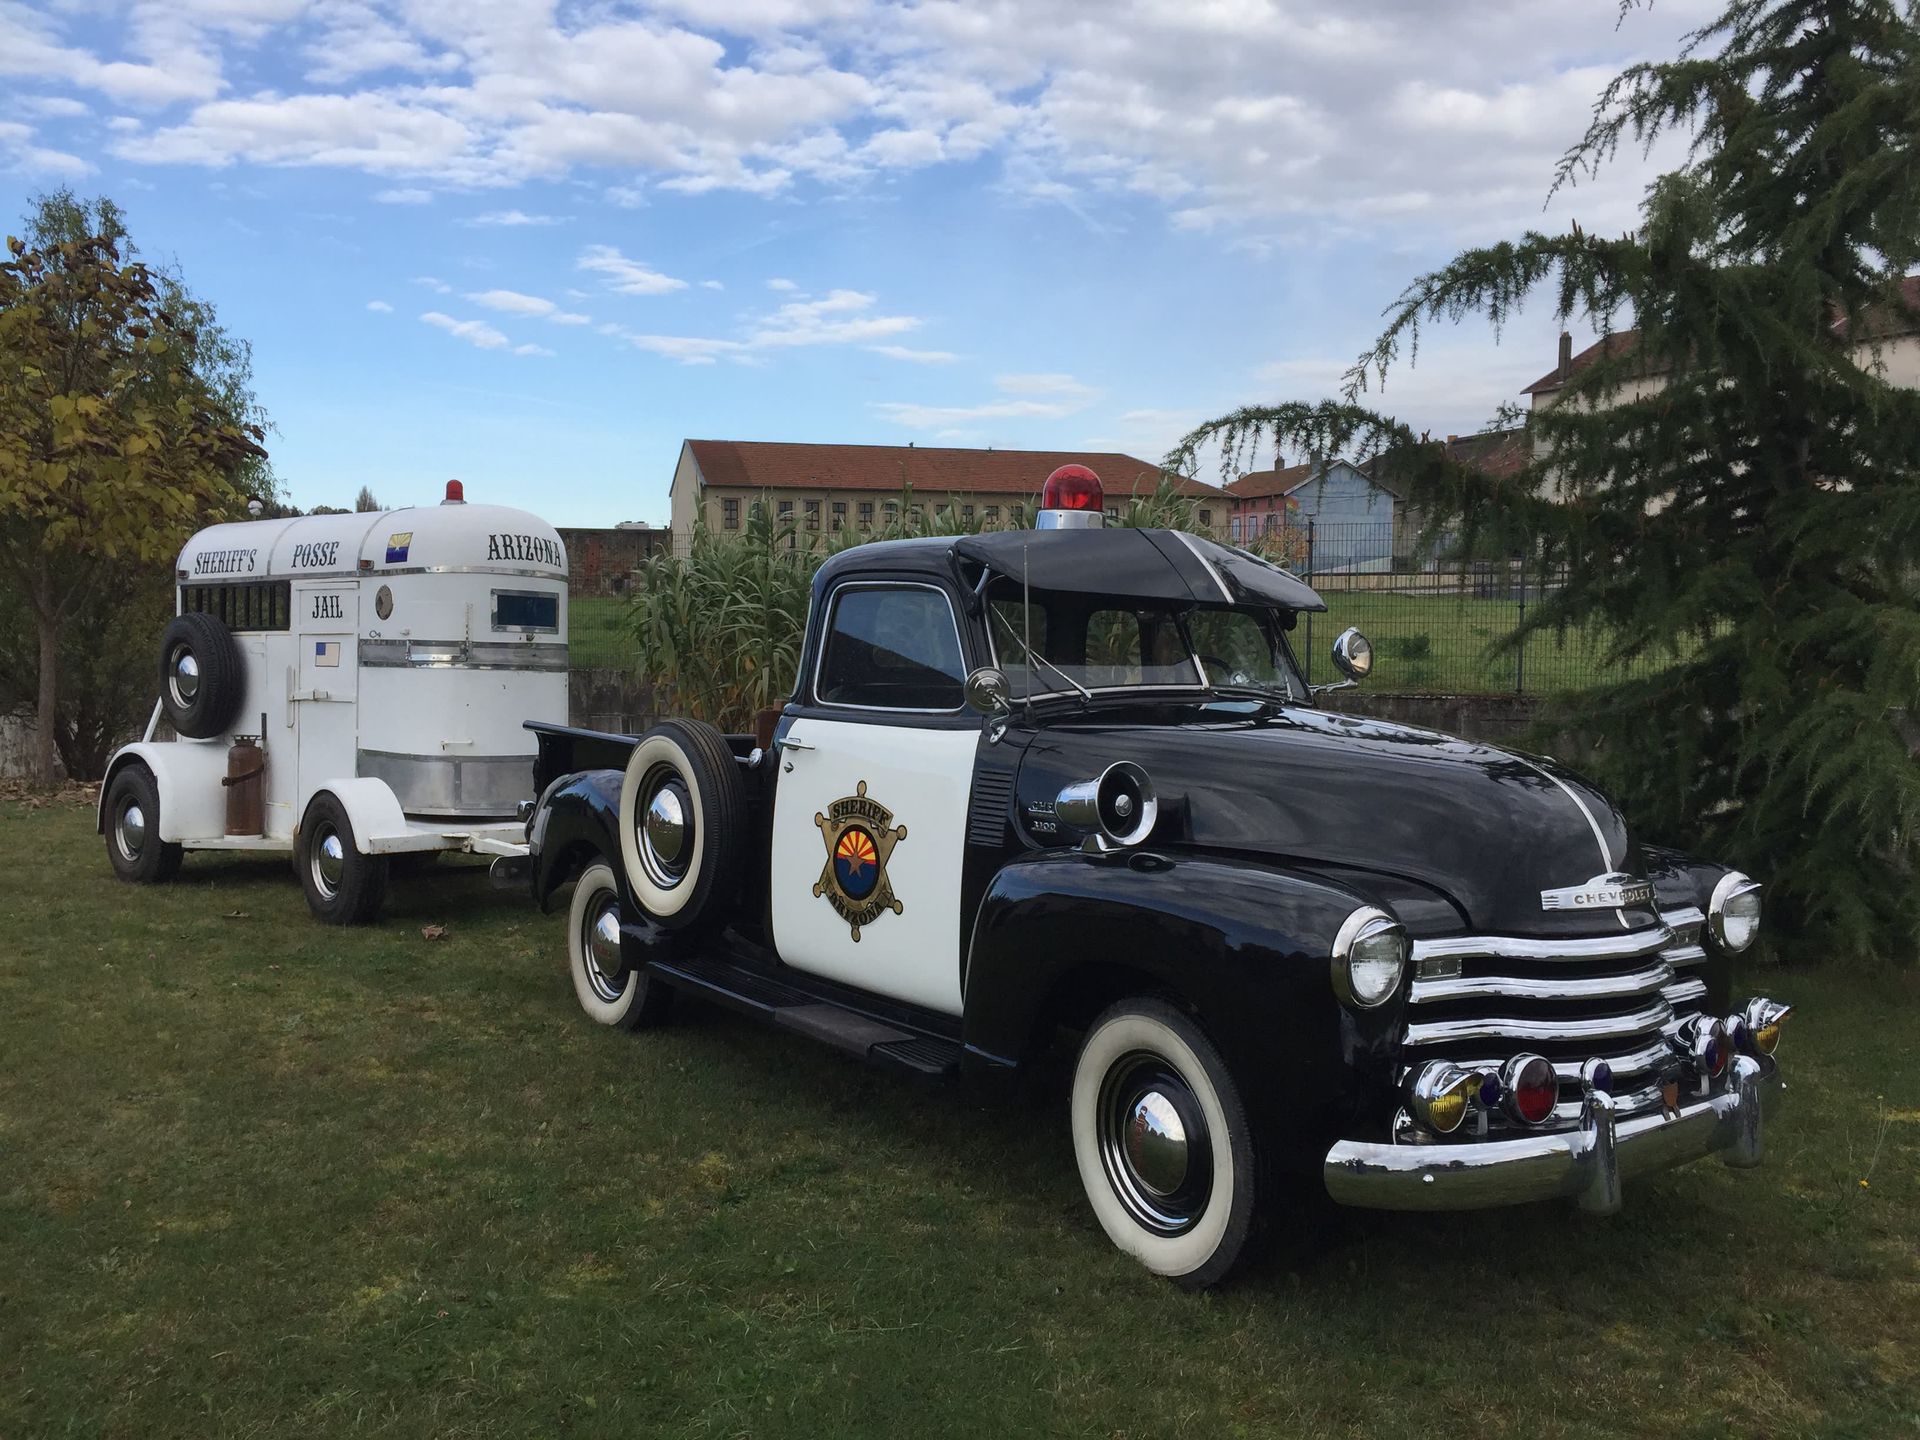 CHEVROLET Pick-up 3100 1949 Collection CGF for the pick up and the trailer

Vehi&hellip;